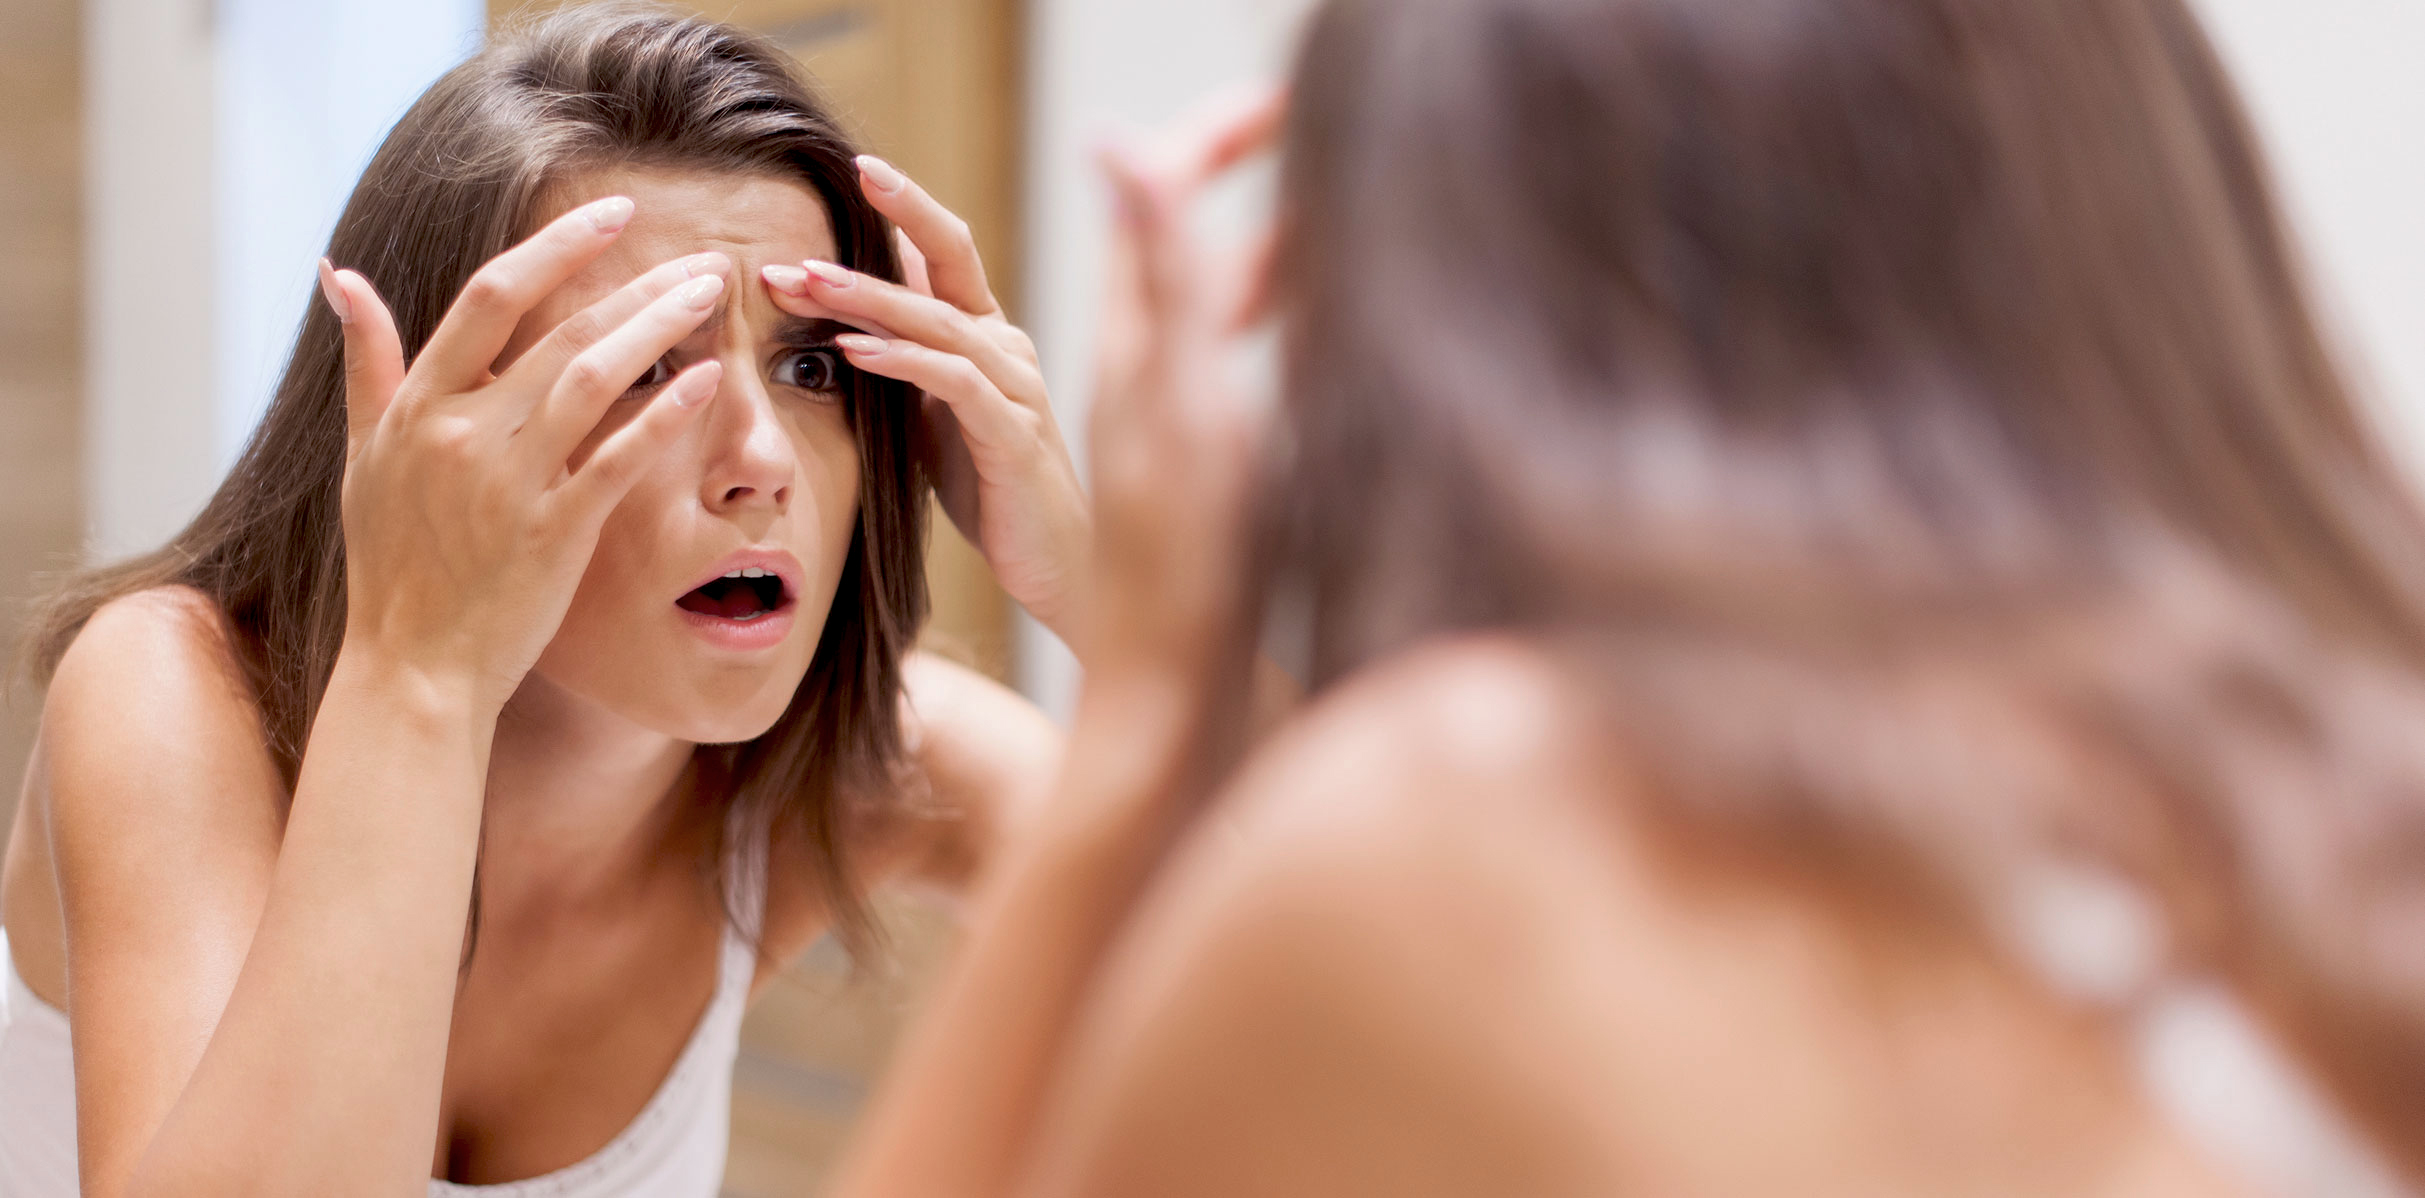 Emotional Stress And Acne!! Is It True That Worrying Causes Acne?